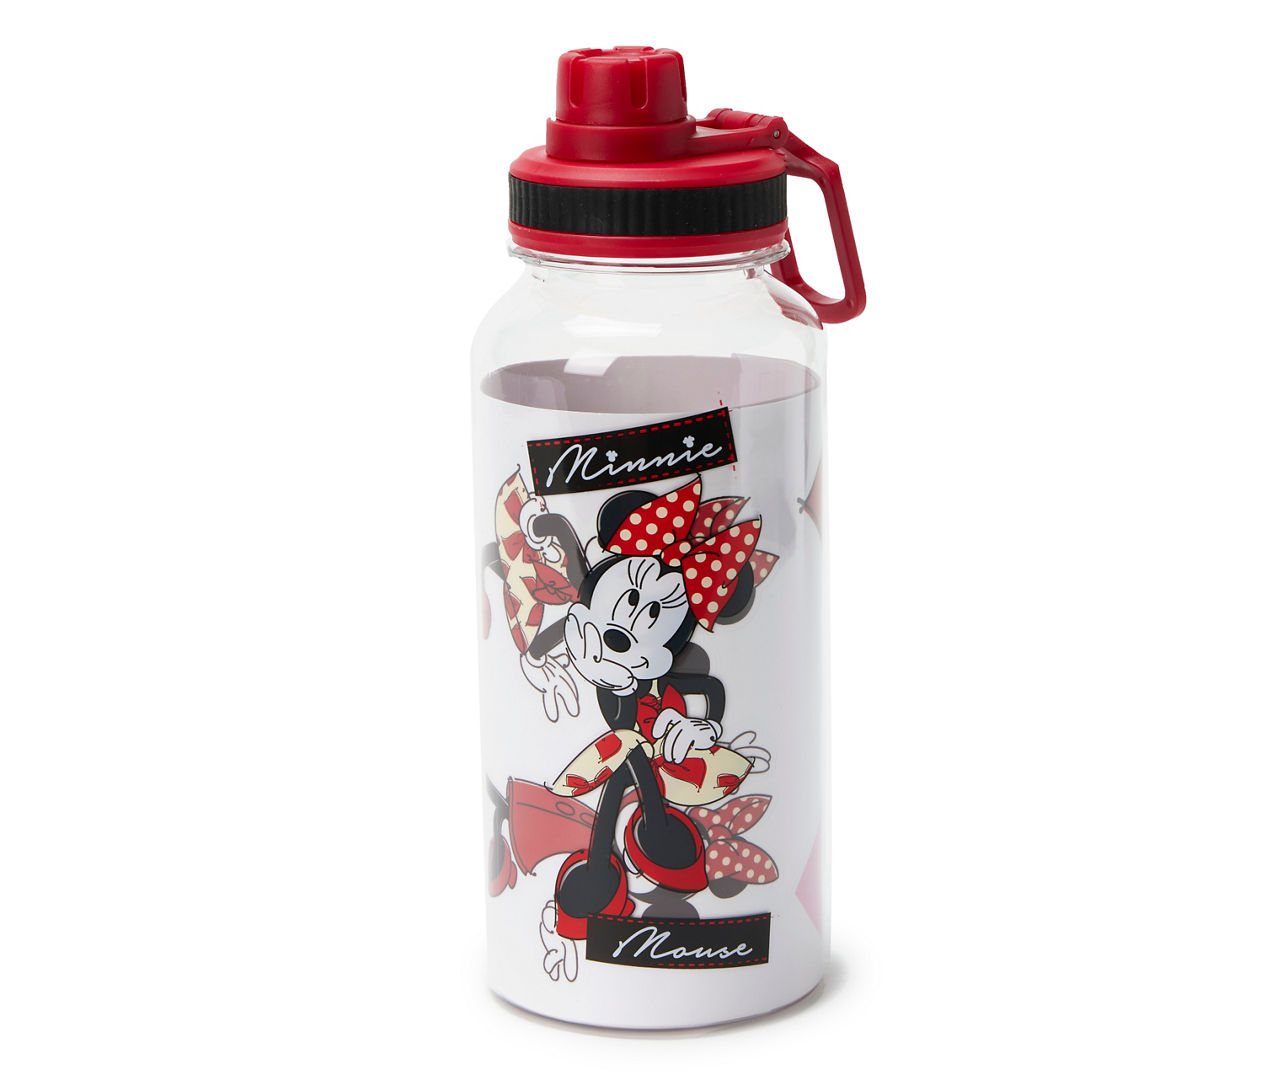 Disney Red & Black Minnie Mouse Water Bottle With Sticker Sheet, 32 oz.